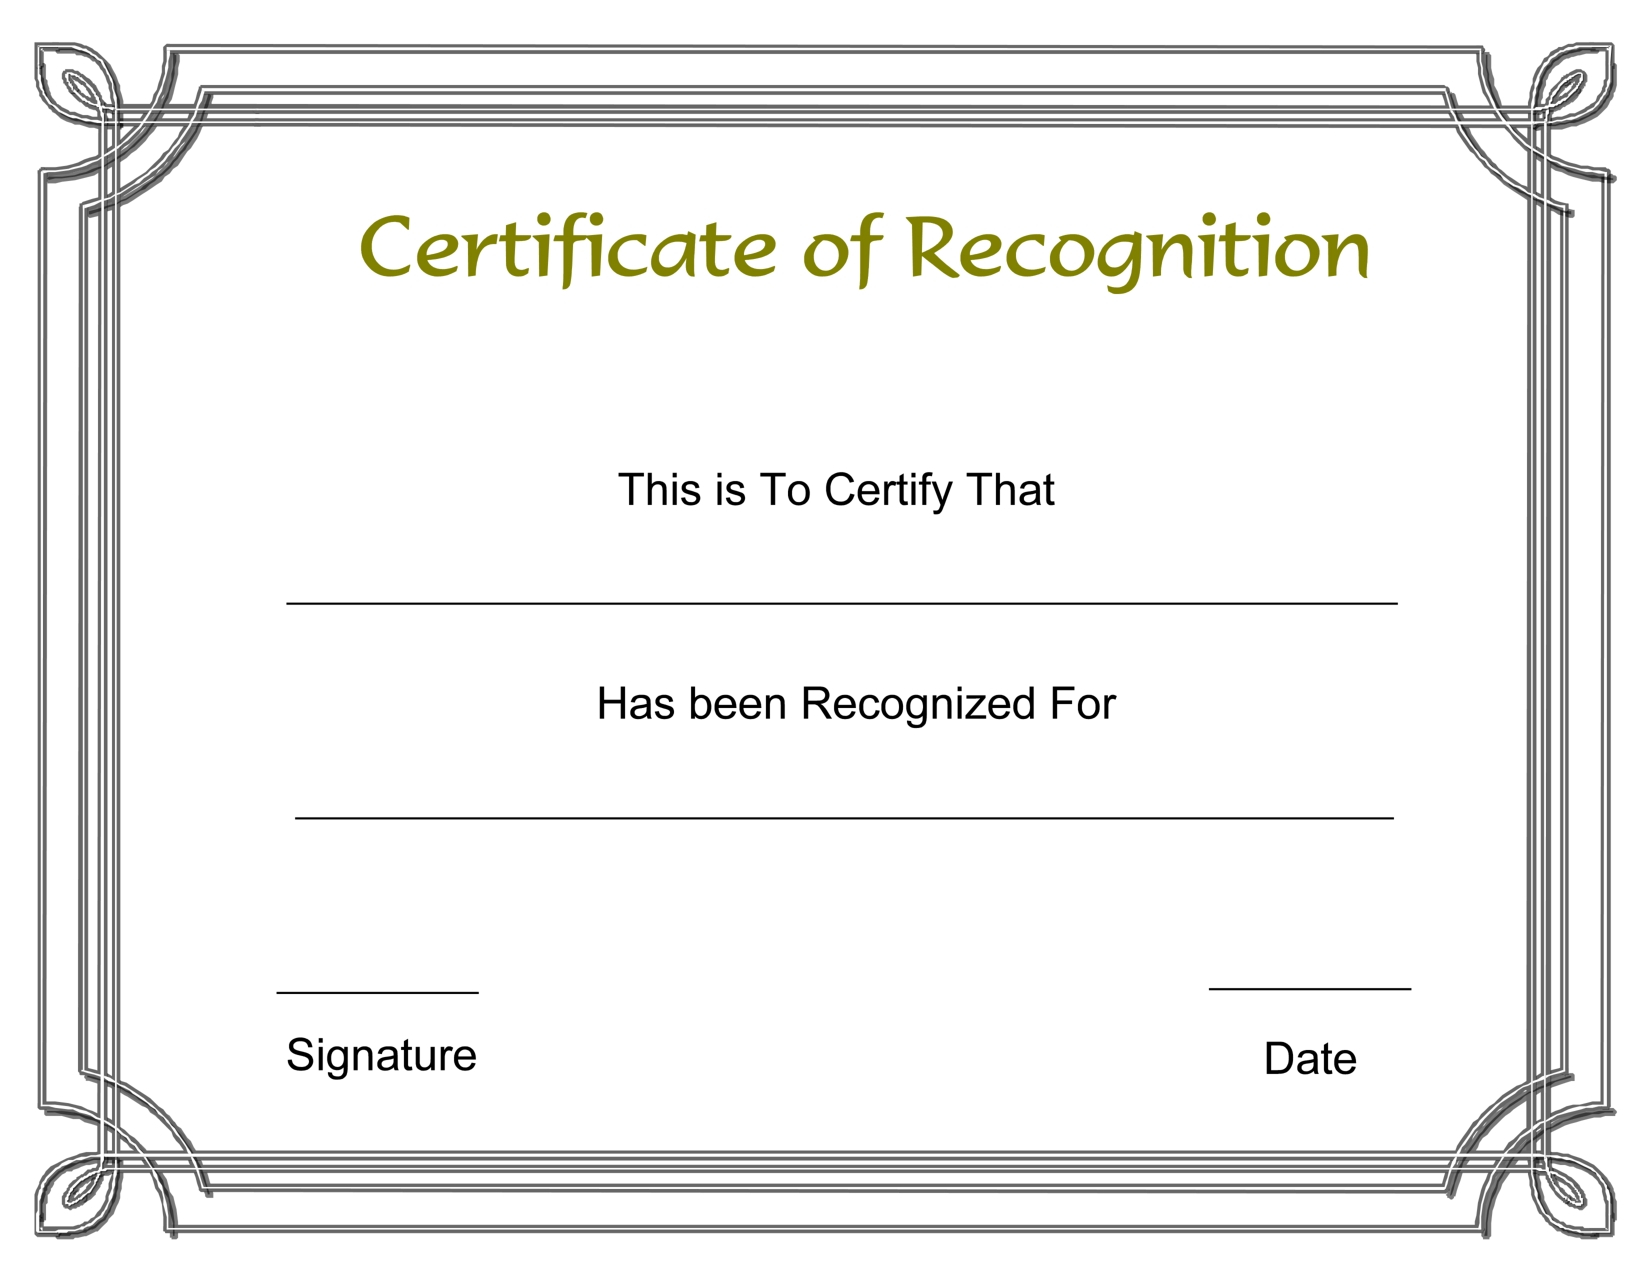 Certificate Template Recognition | Safebest.xyz In Microsoft Word Award Certificate Template